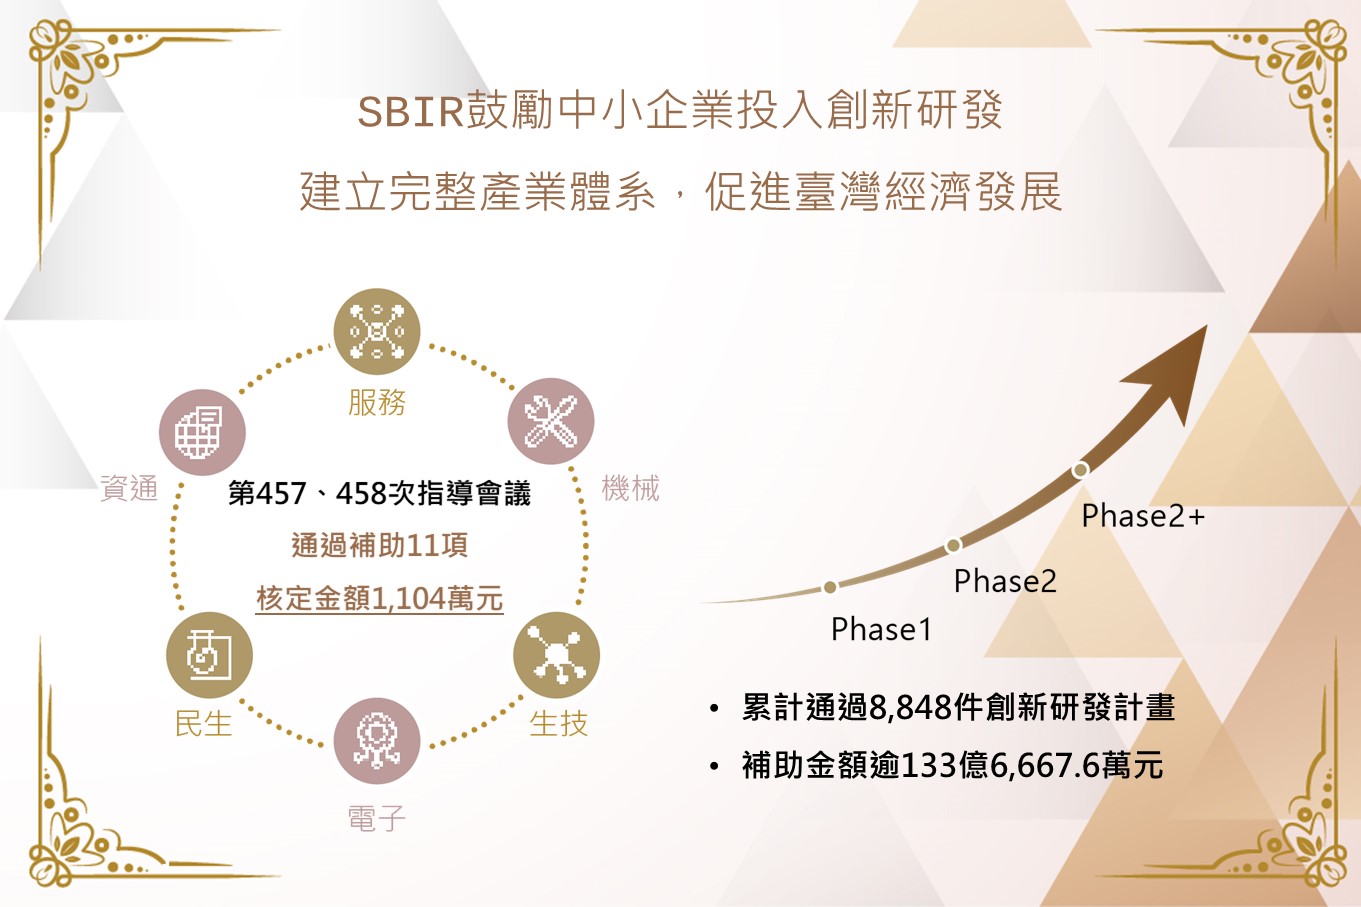 Small and Medium Enterprise Administration,Ministry of Economic Affairs No. 457  458 SBIR Steering Committee,Approved the subsidies for 11 SBIR Projects